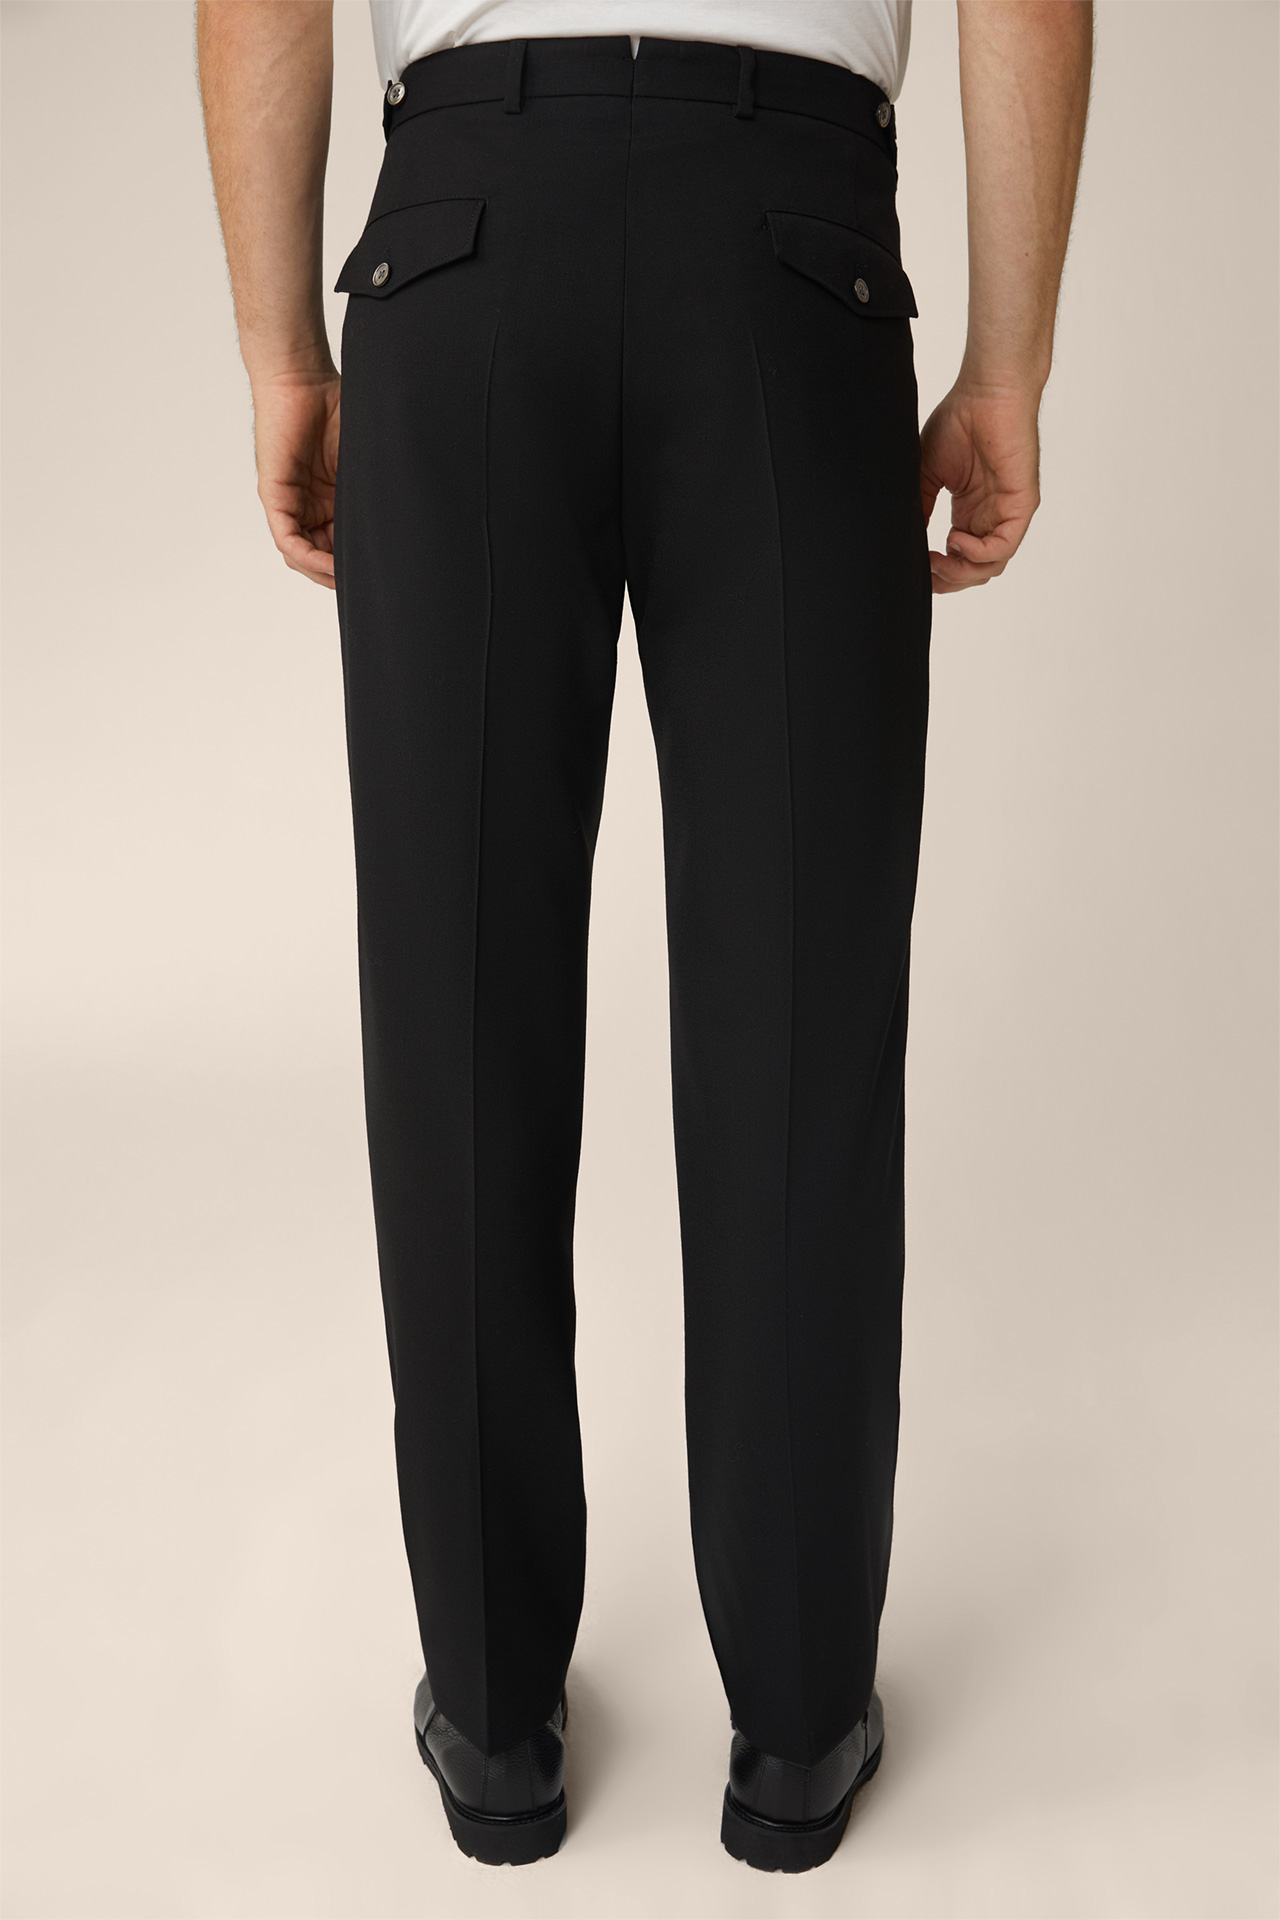 Frero Virgin Wool Modular Trousers with Pleat-front in Black